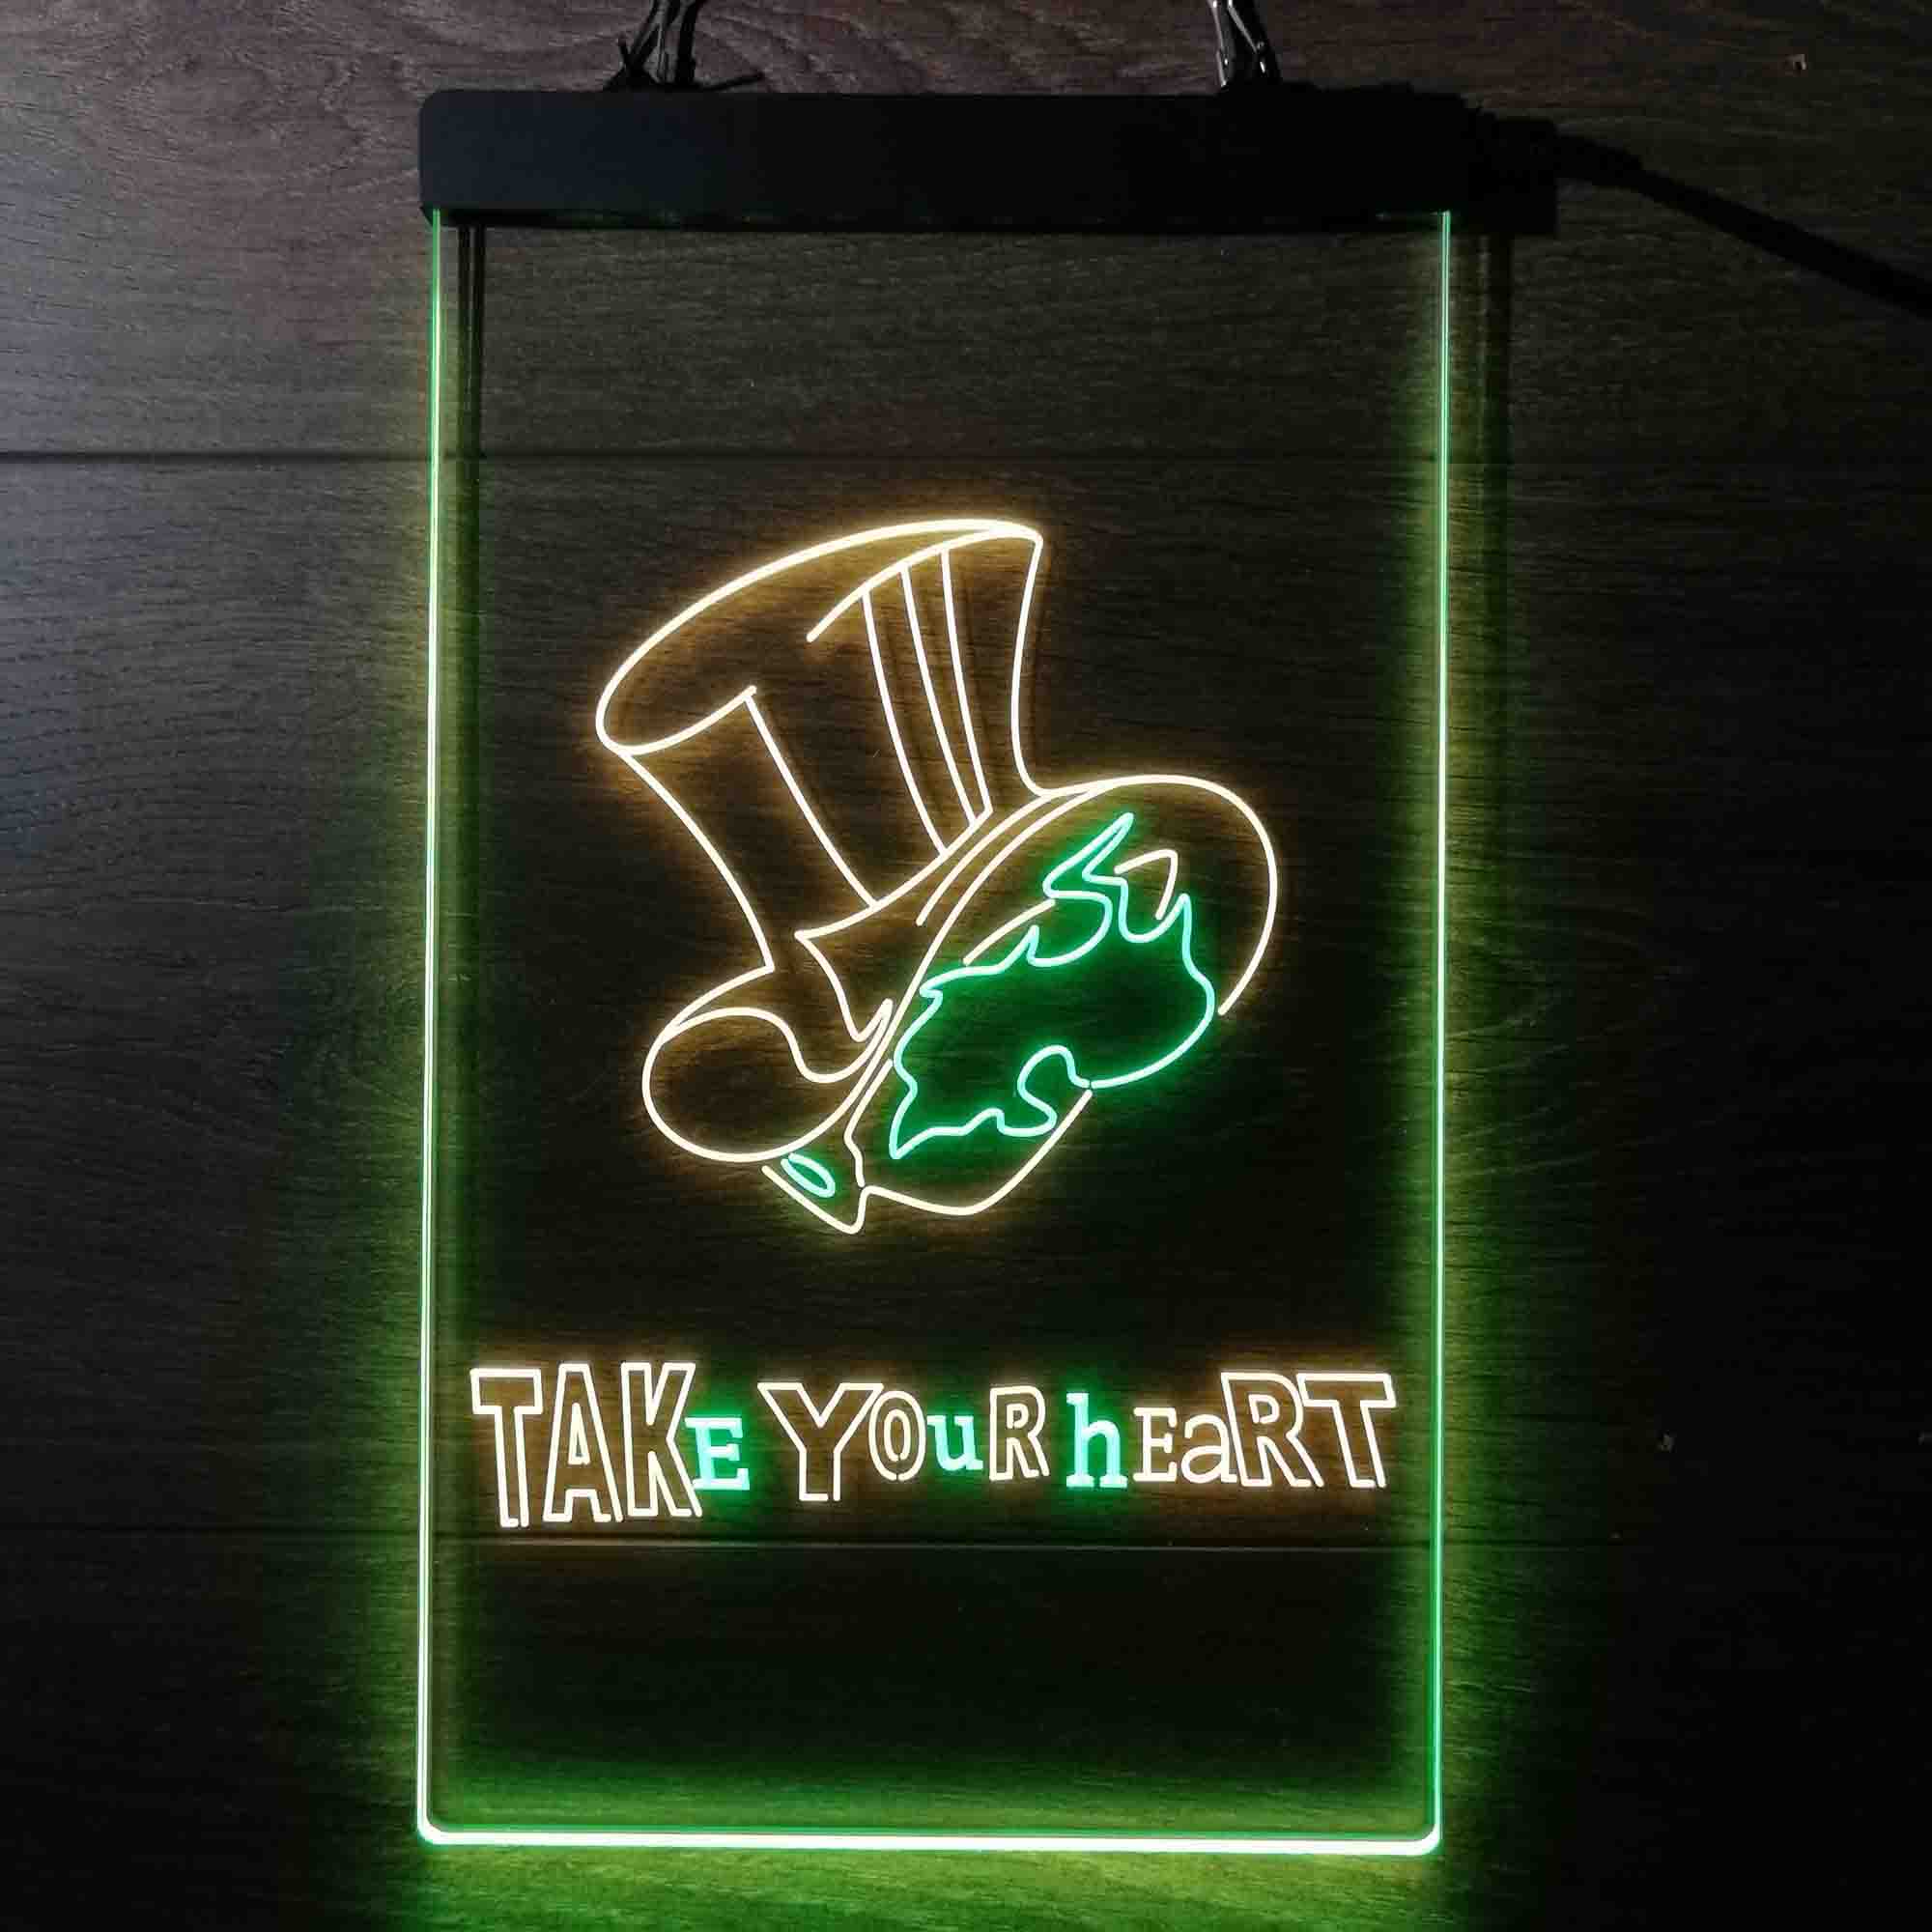 Persona 5 Take Your Heart Neon LED Sign